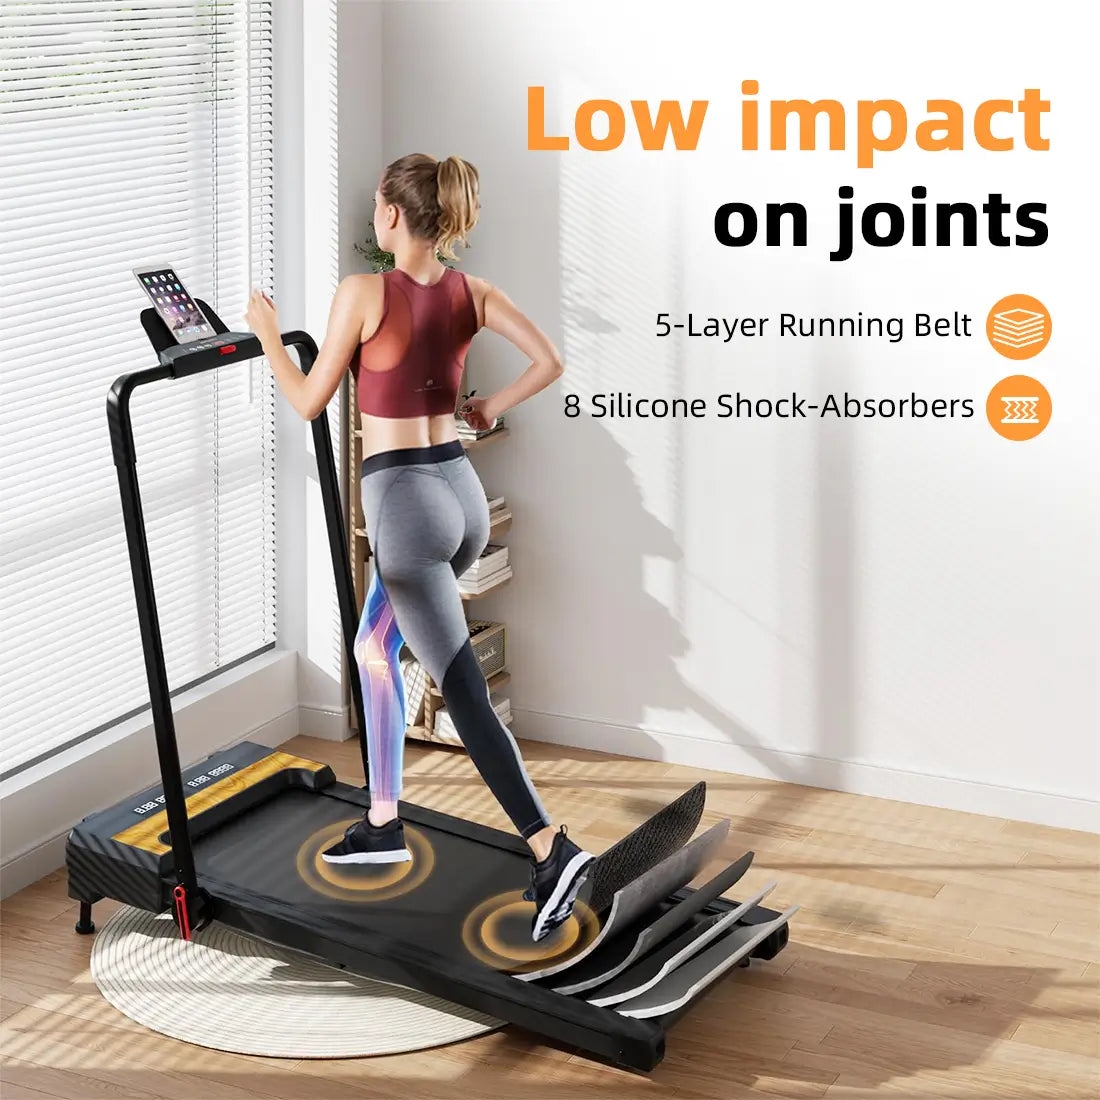 Tousains 2 in 1 incline treadmill with low impact